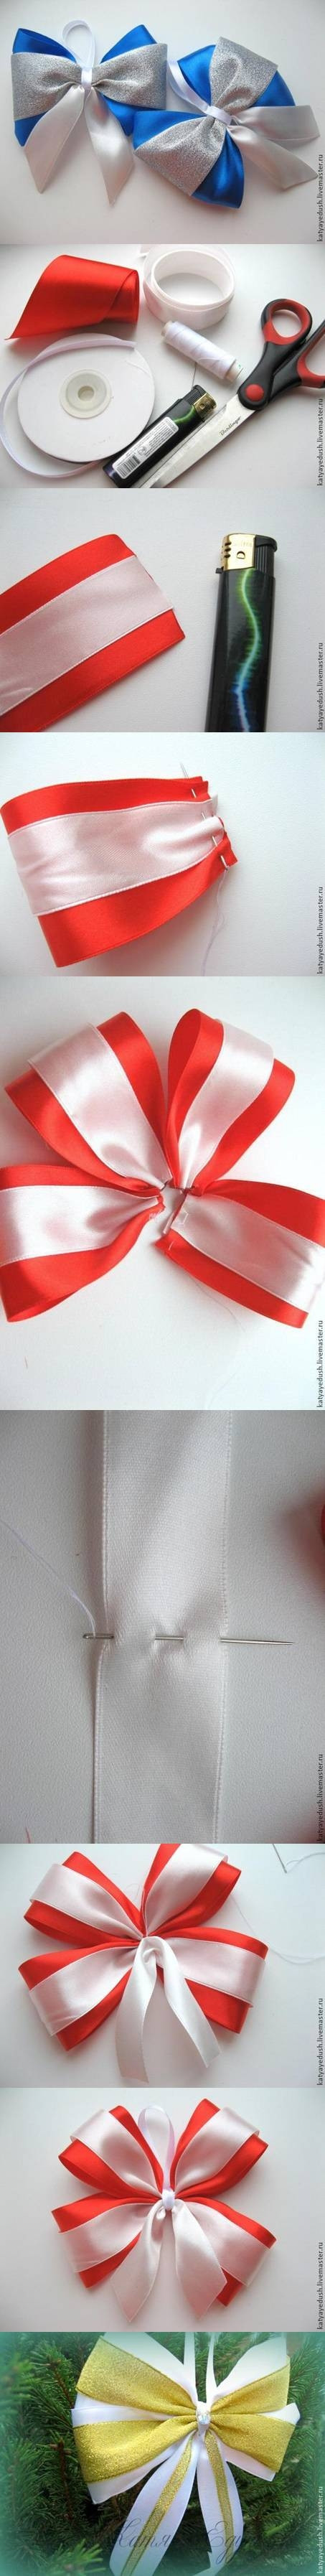 DIY Christmas Tree Bows
 DIY Christmas Tree Bows s and for